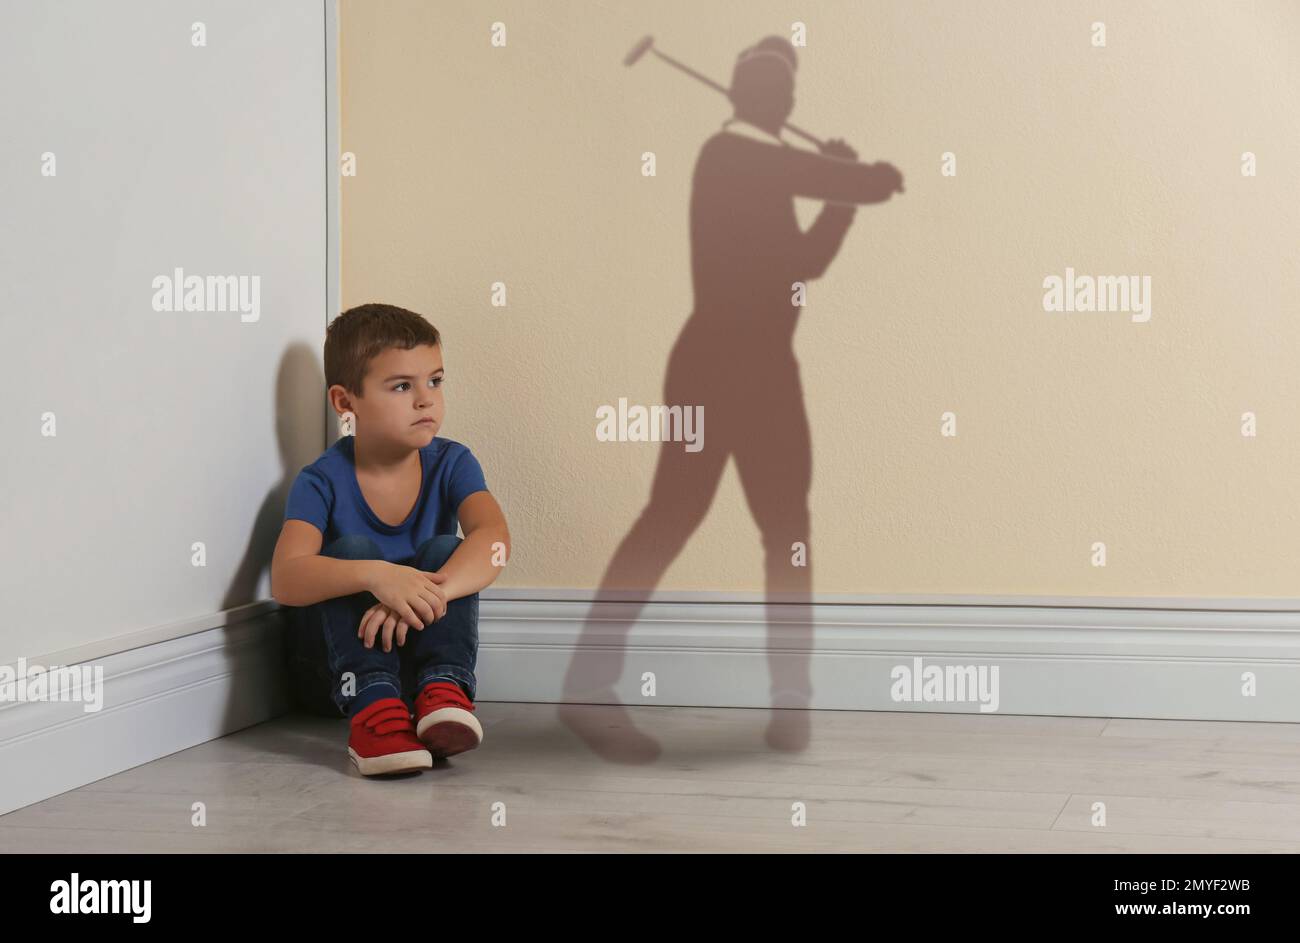 Little boy dreaming to be golf player. Silhouette of man behind kid's back Stock Photo